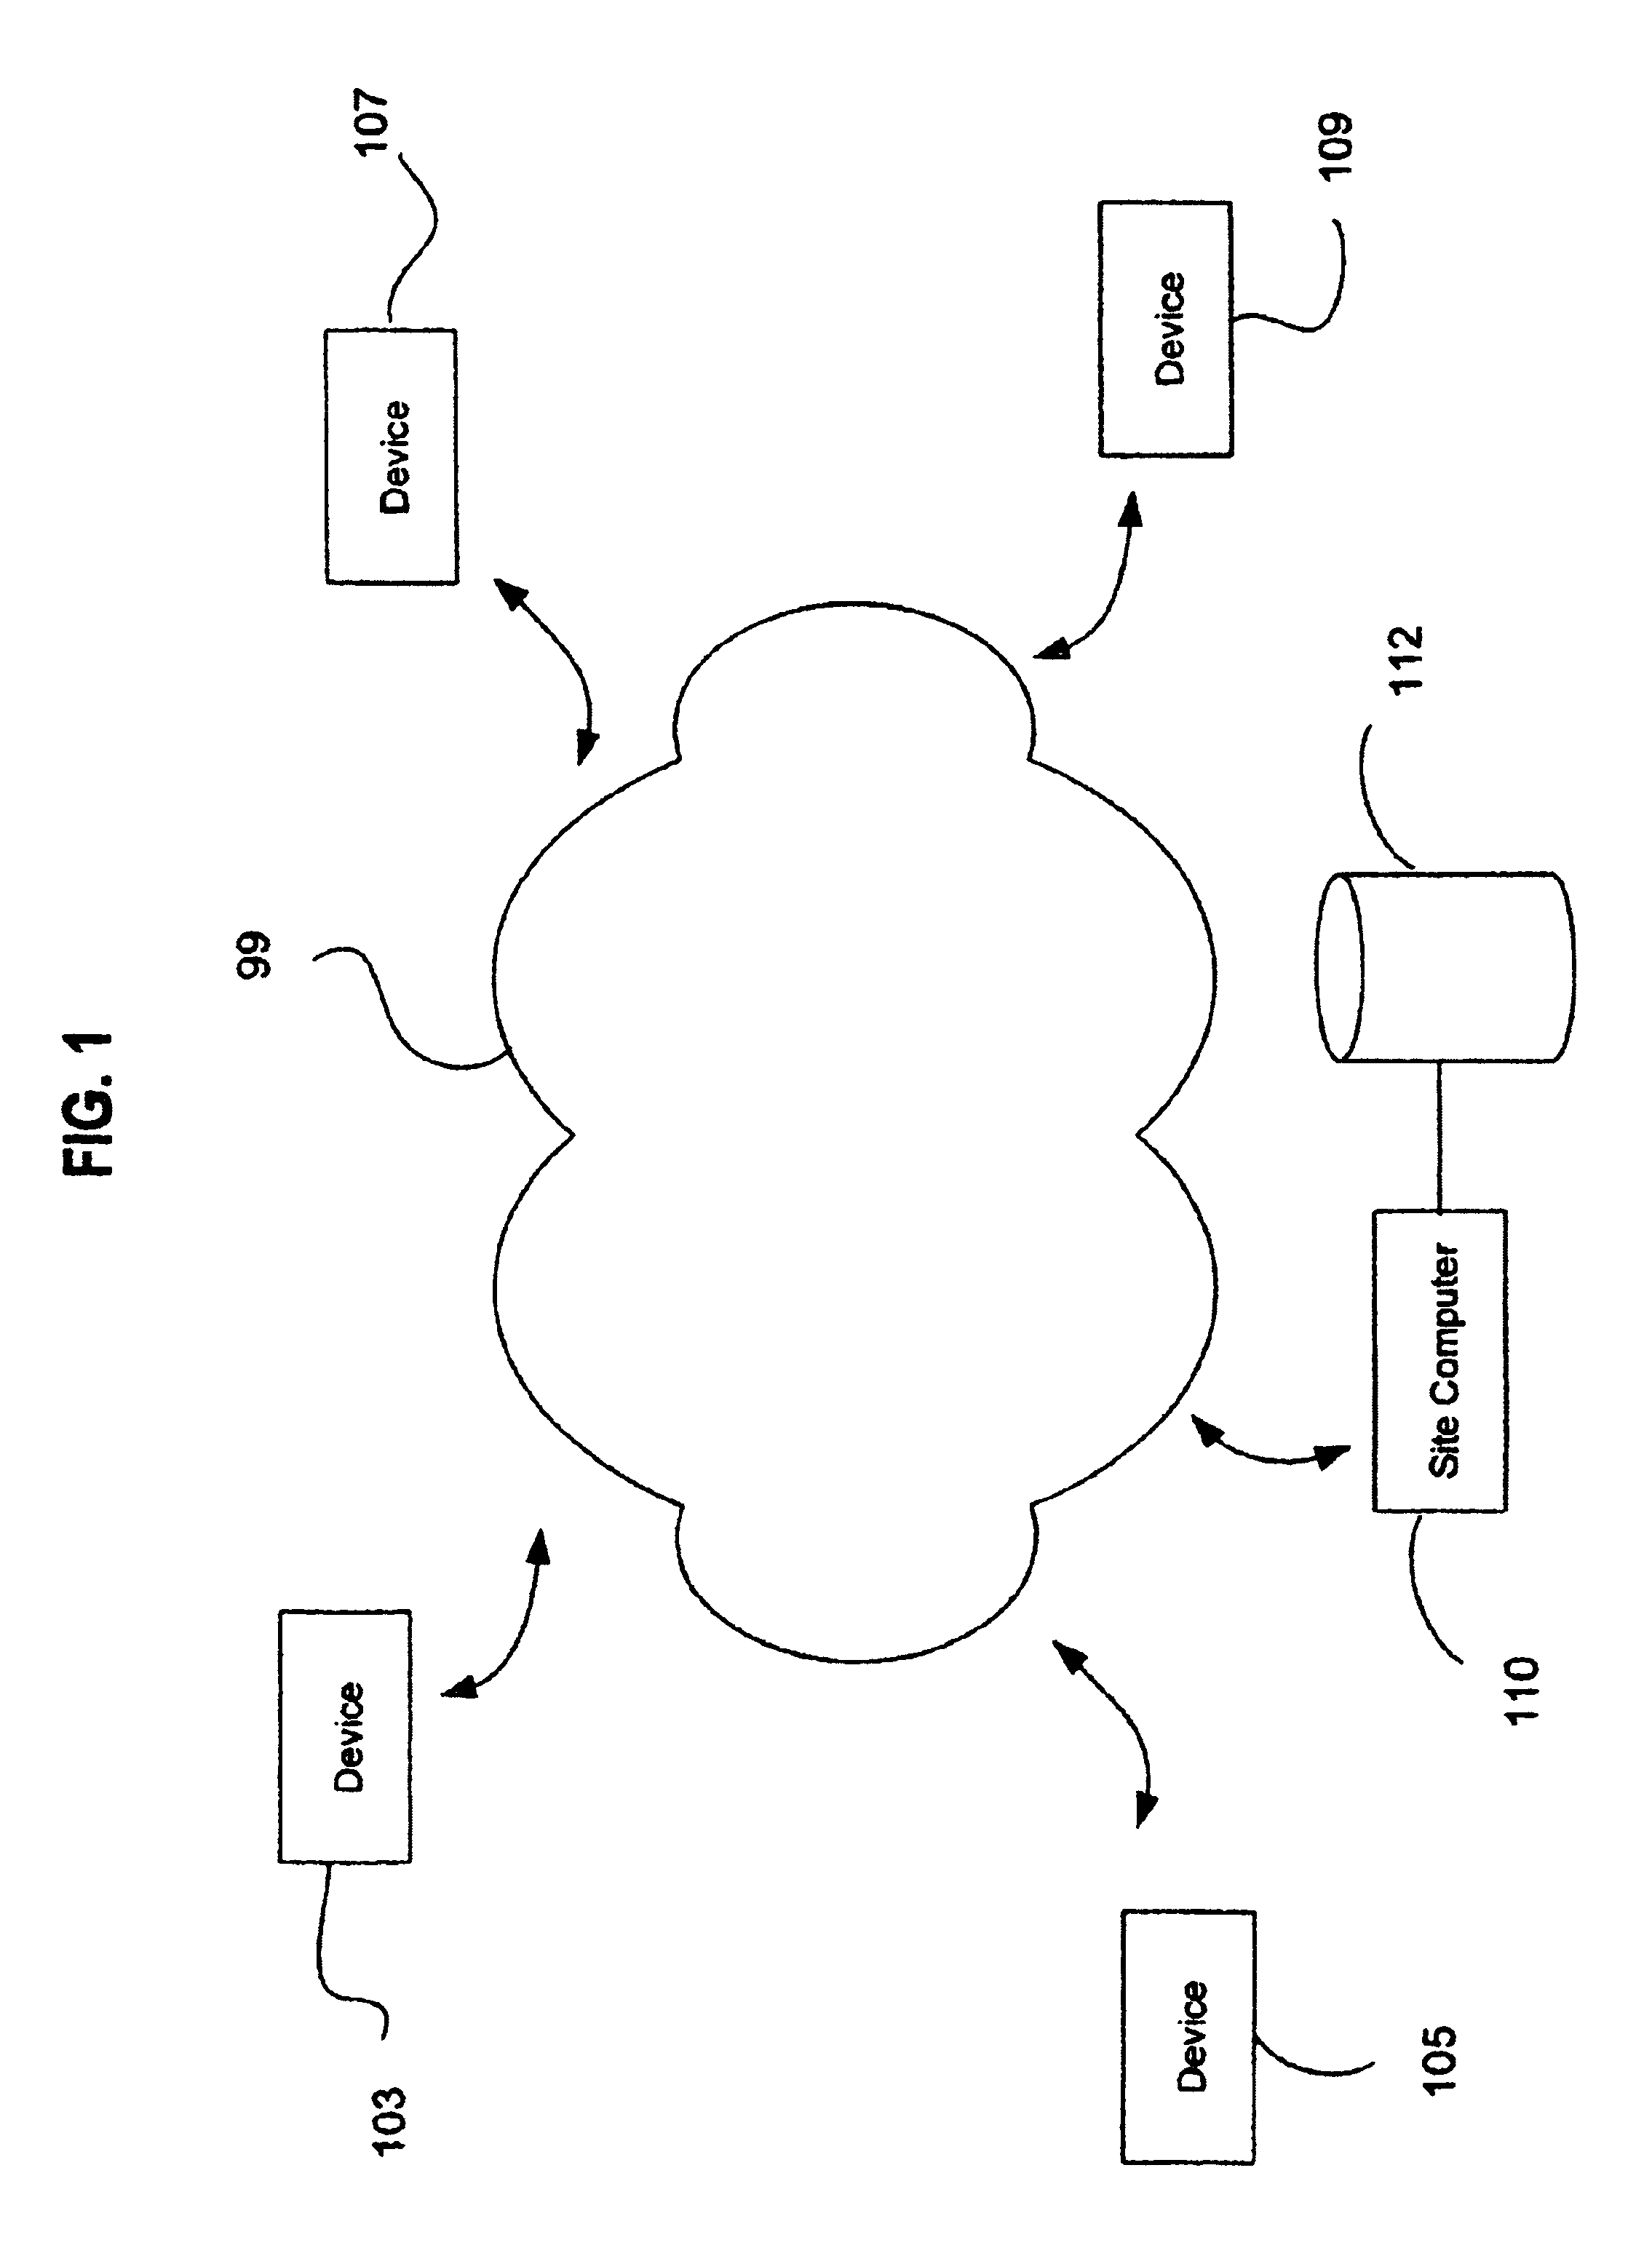 Method for accessing component fields of a patient record by applying access rules determined by the patient